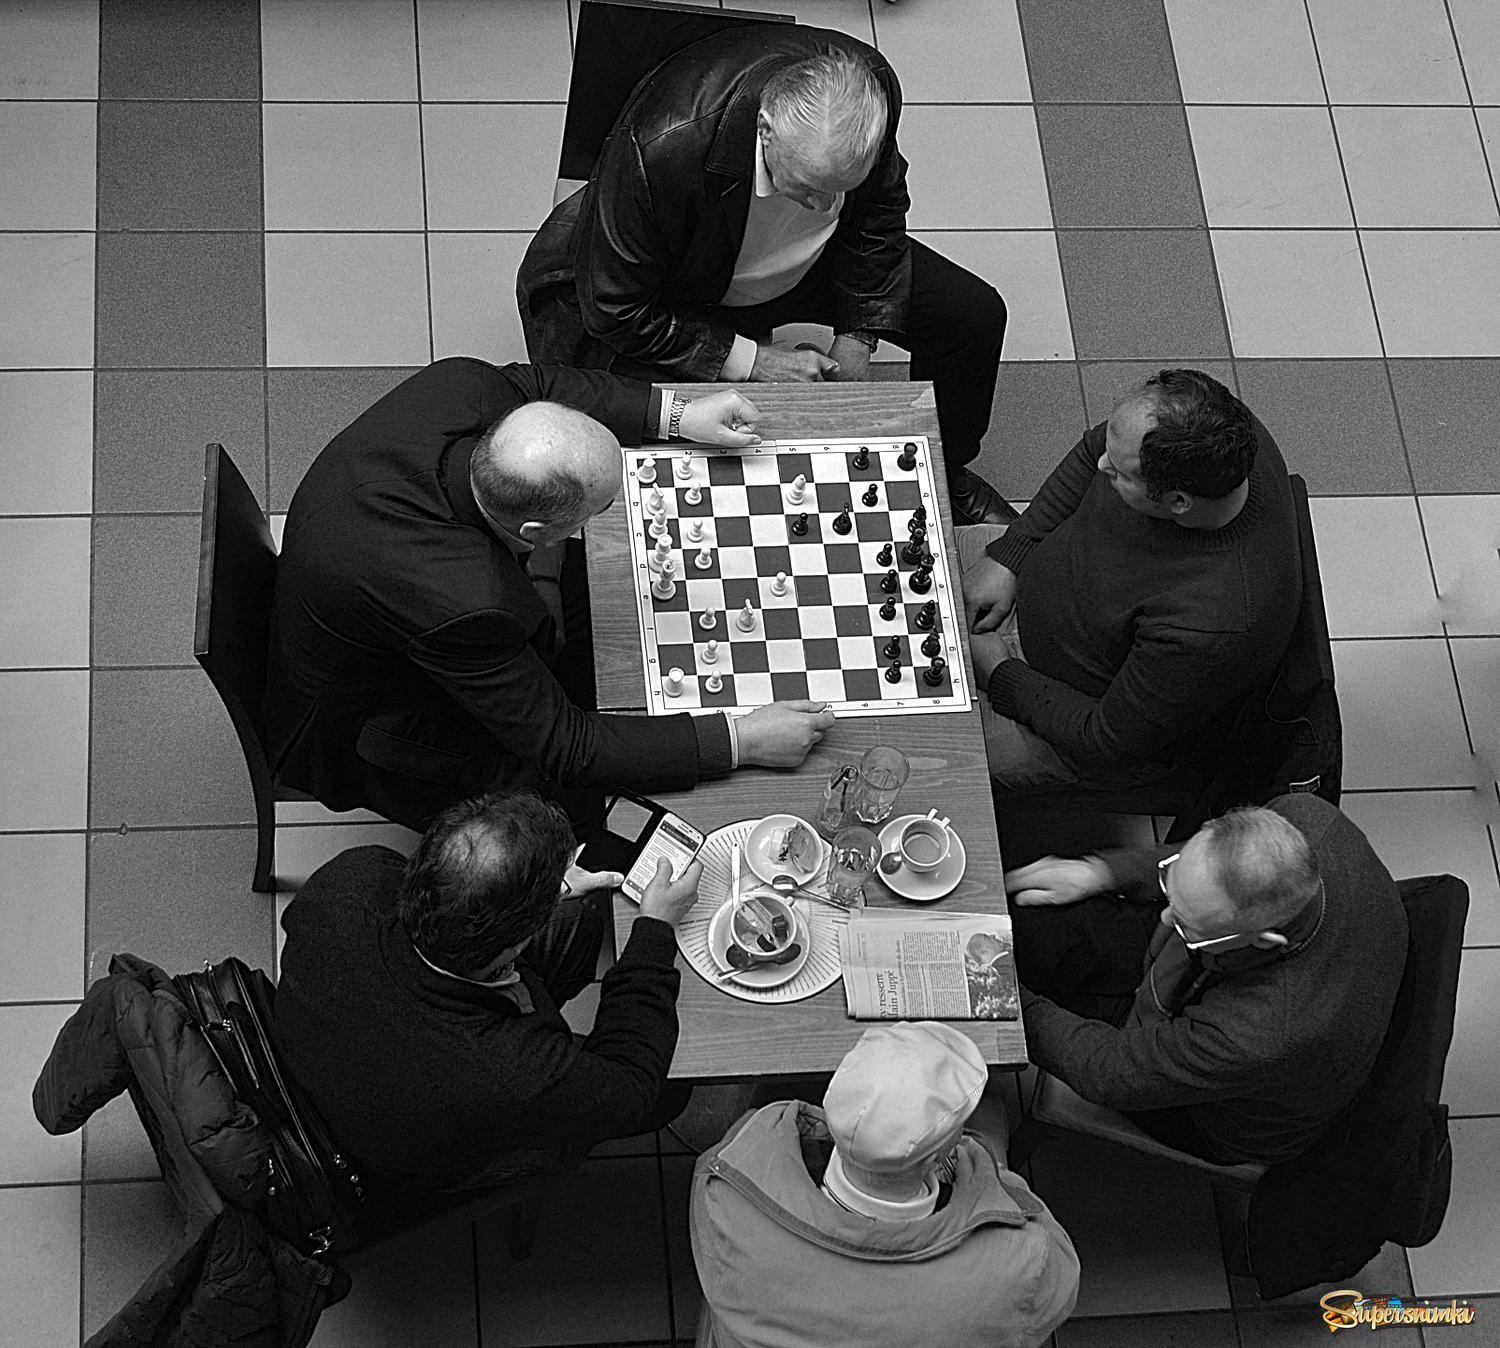 The chess players.